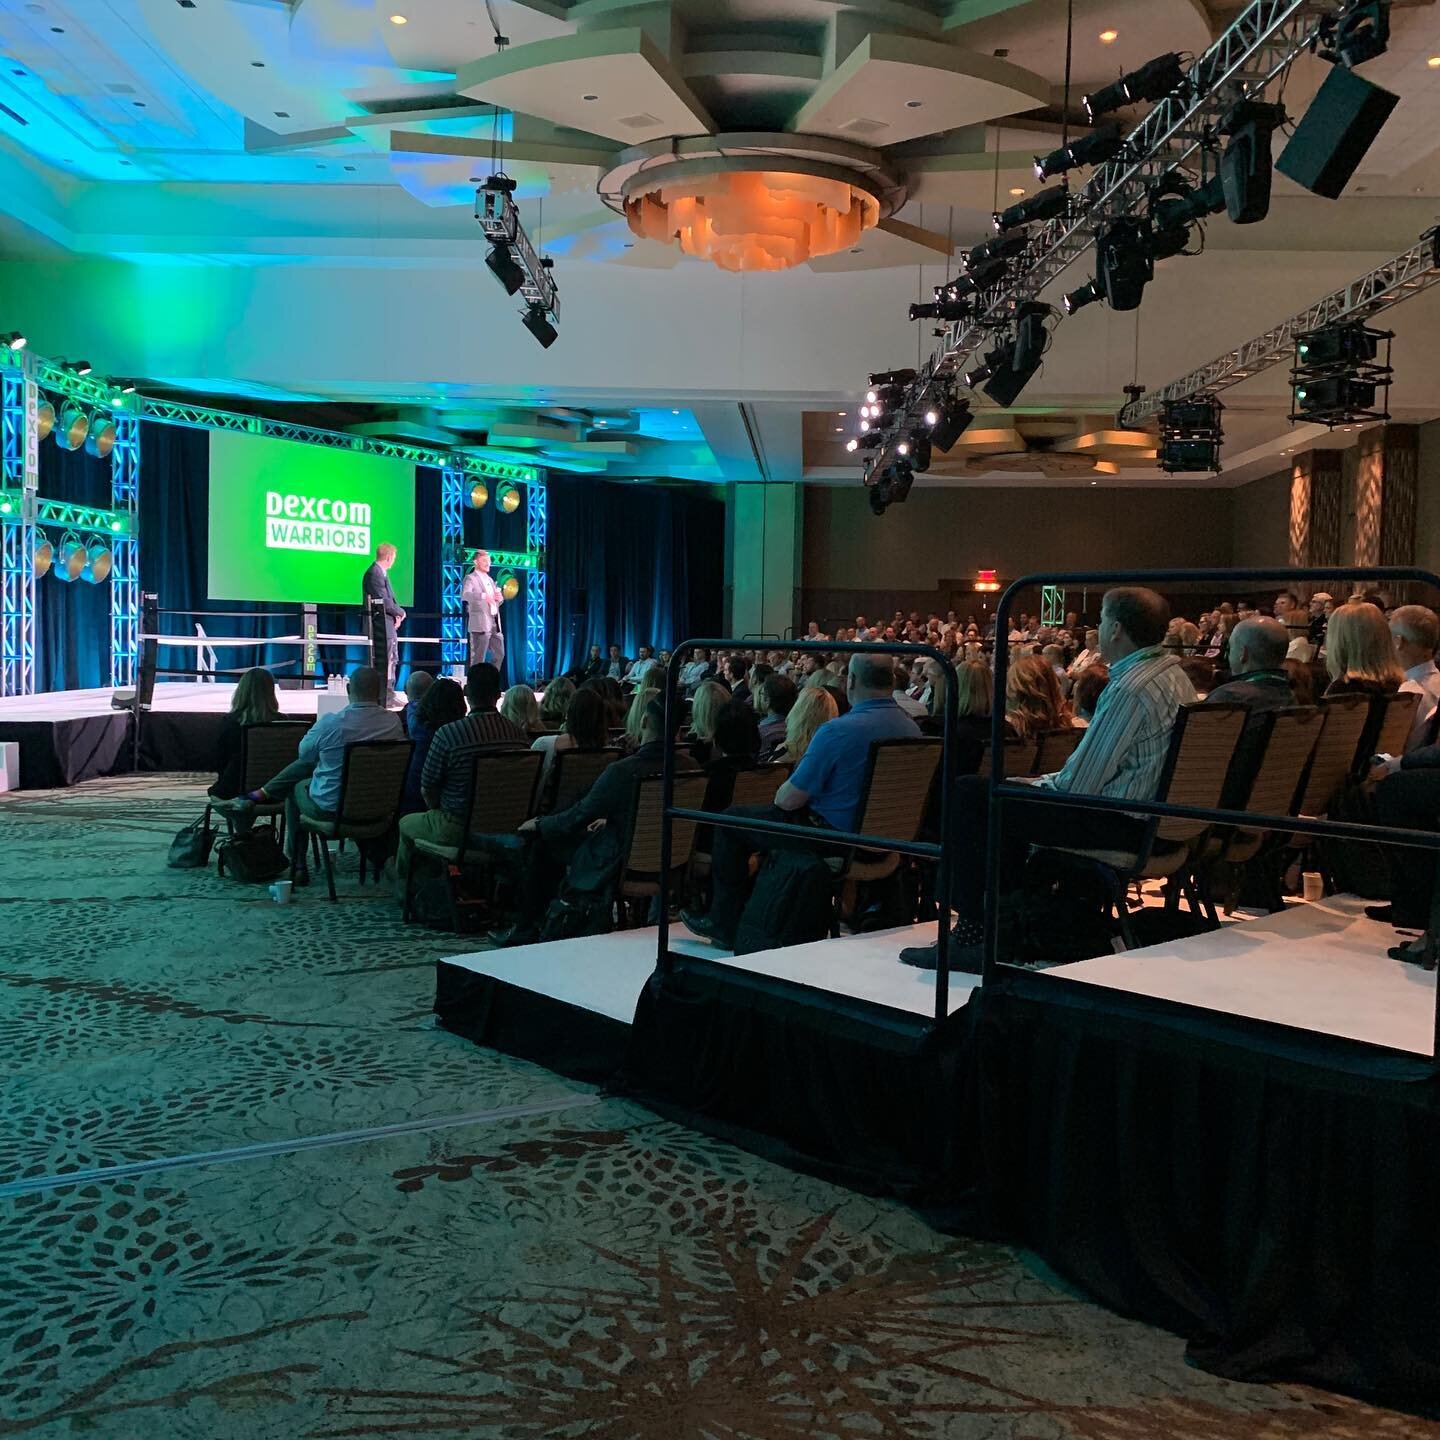 We couldn&rsquo;t have been more honored to be invited to speak at Dexcom&rsquo;s National Sales Meeting in Arizona.
.
The @dexcom G6 system was arguably our most instrumental tool in aiding the success of PROJECT 50-IN-50. With constant intensive ex